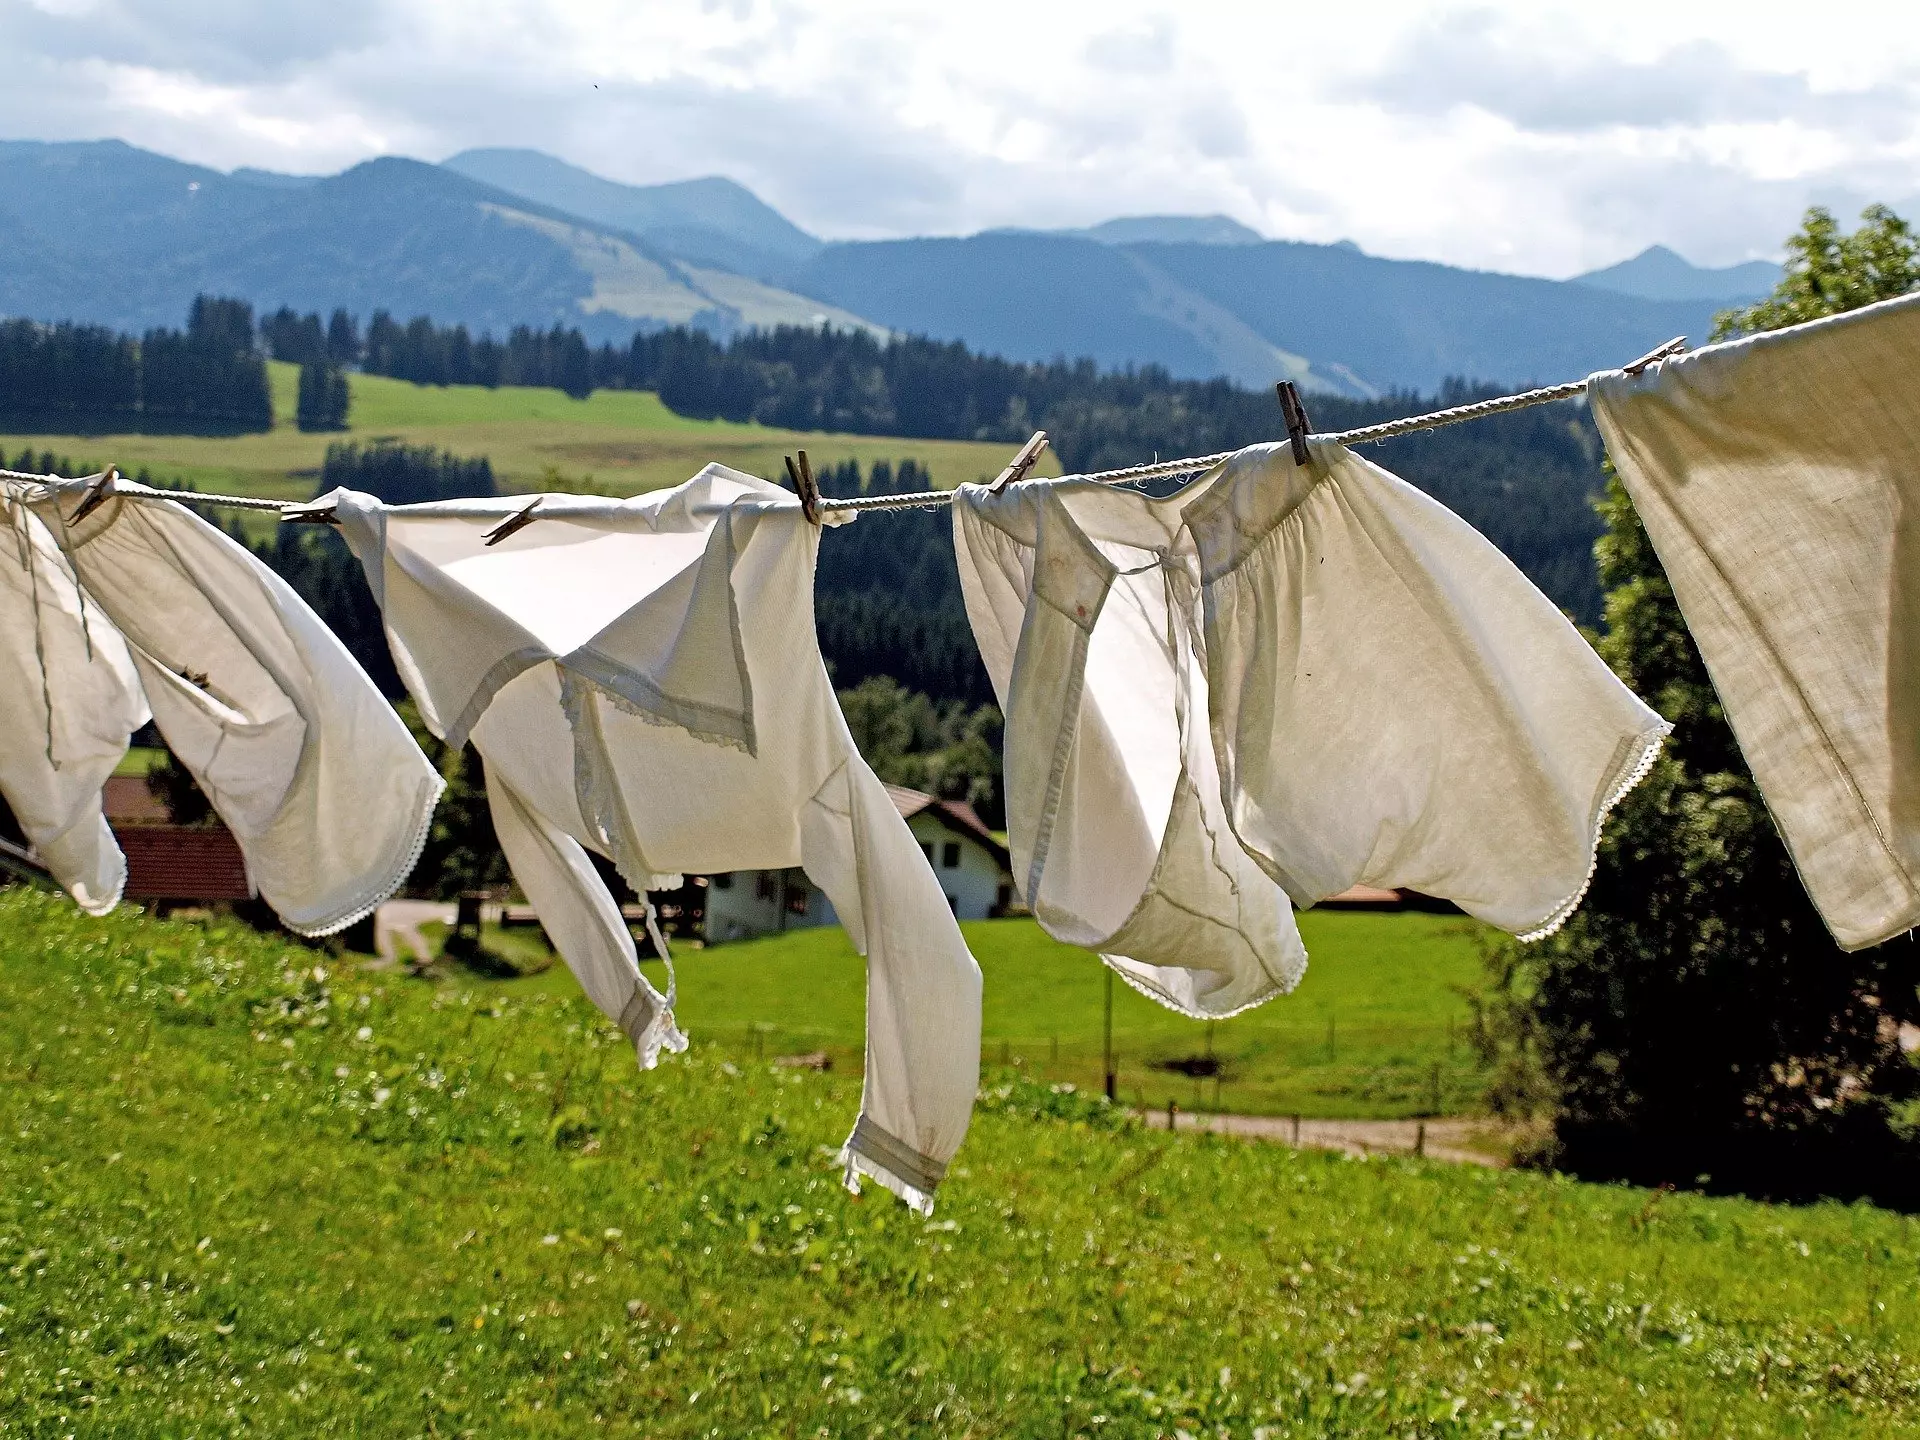 Drying clothes outdoors isn't an option when the sun's not playing ball.